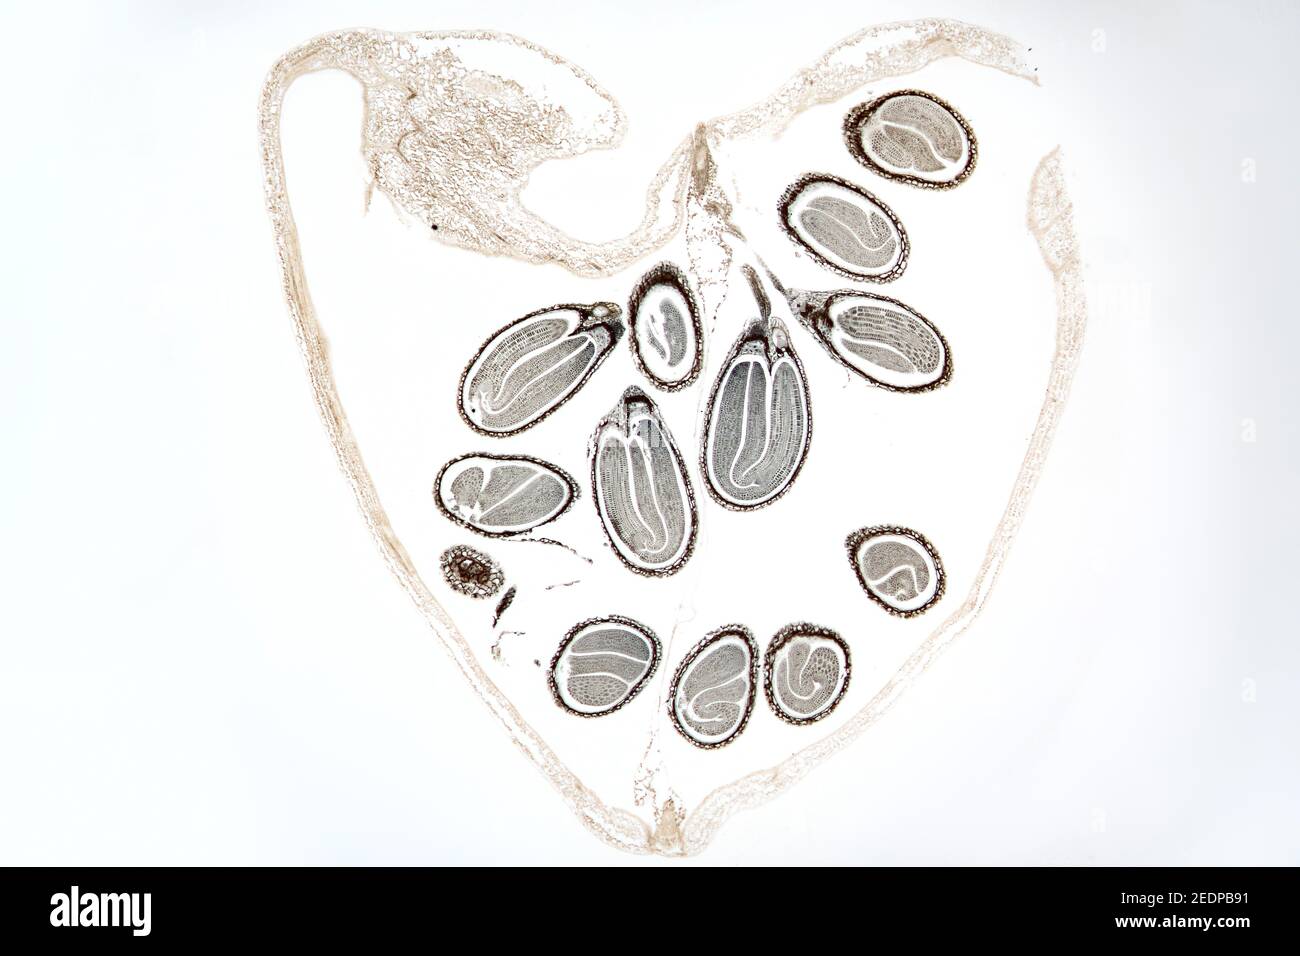 Shepherd's-purse (Capsella bursa-pastoris), longitudinals cut of the fruit, with seeds and their embryos, microtome section, Europe Stock Photo